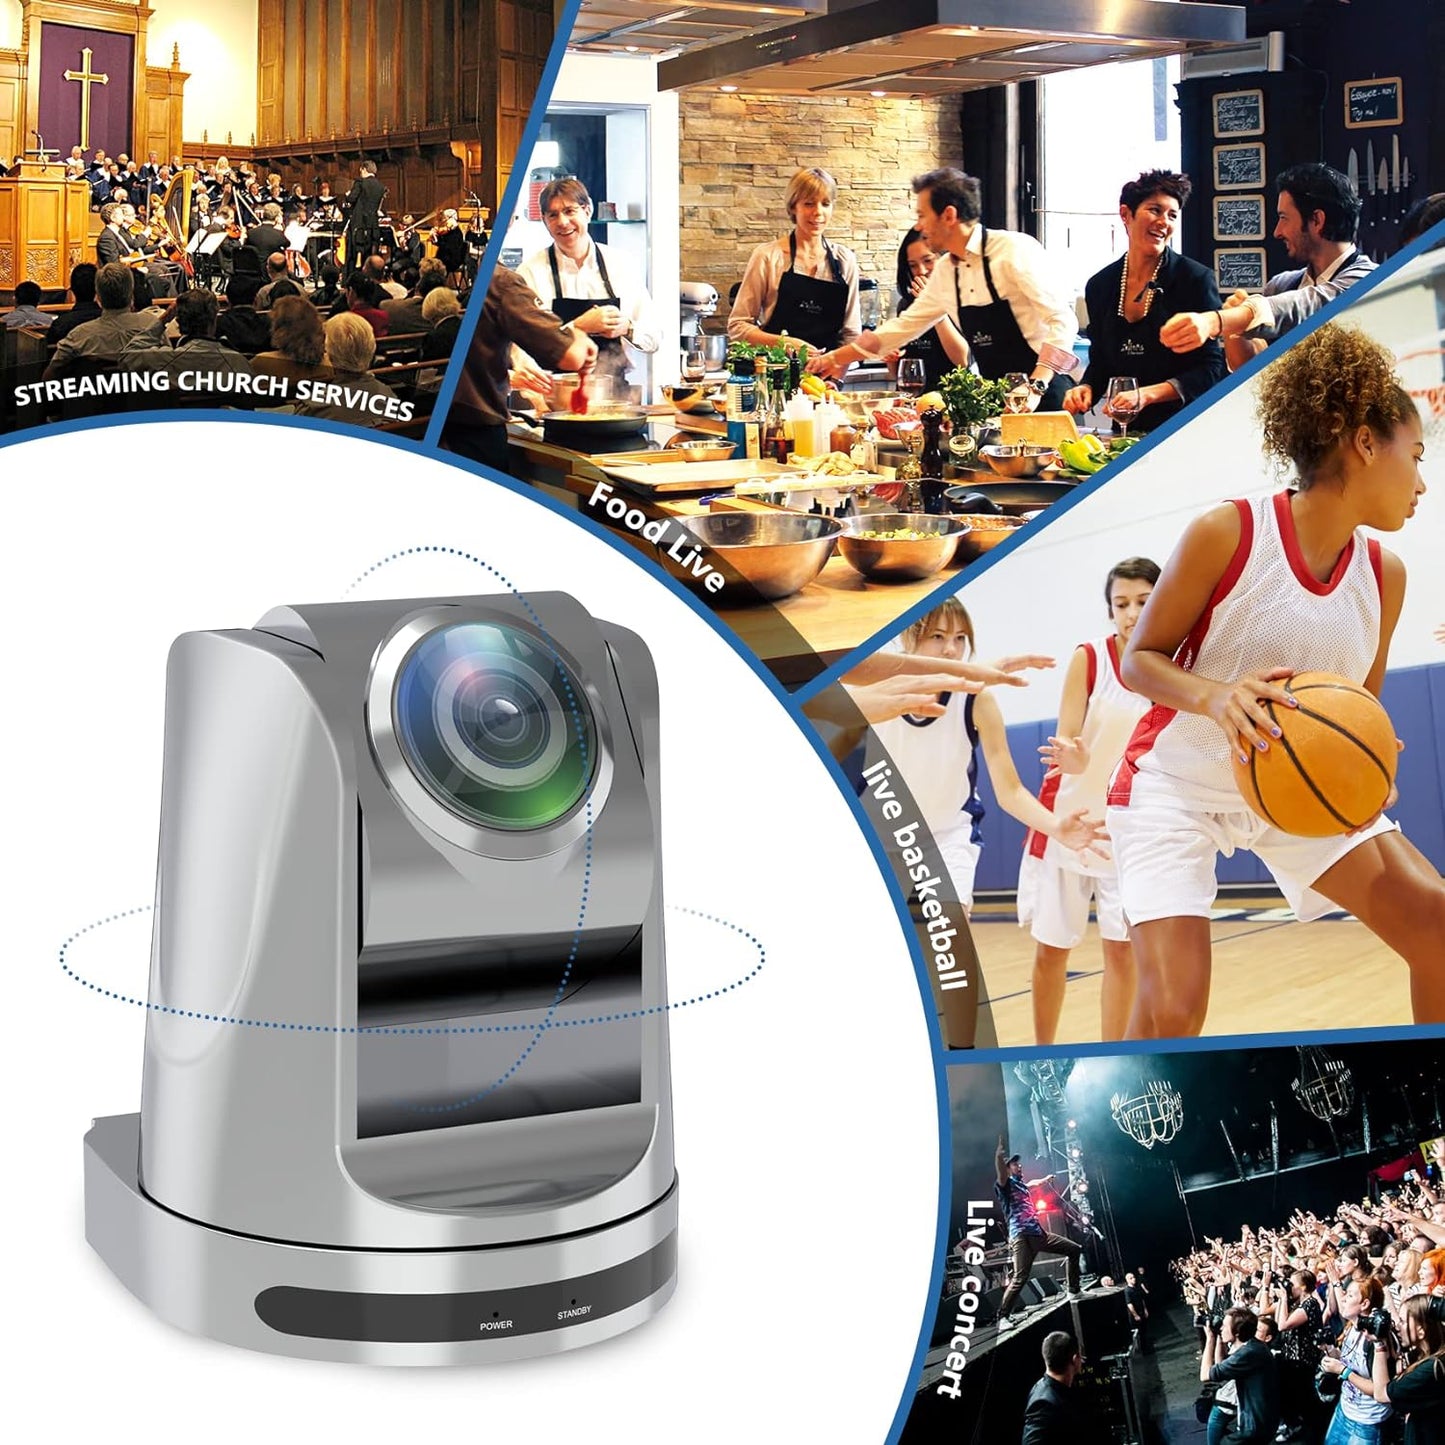 Hsility PTZ Camera 1080P 60fps 30x 3G-SDI HDMI Live Streaming Camera for Church Worship Events School Hospital Conference Broadcast